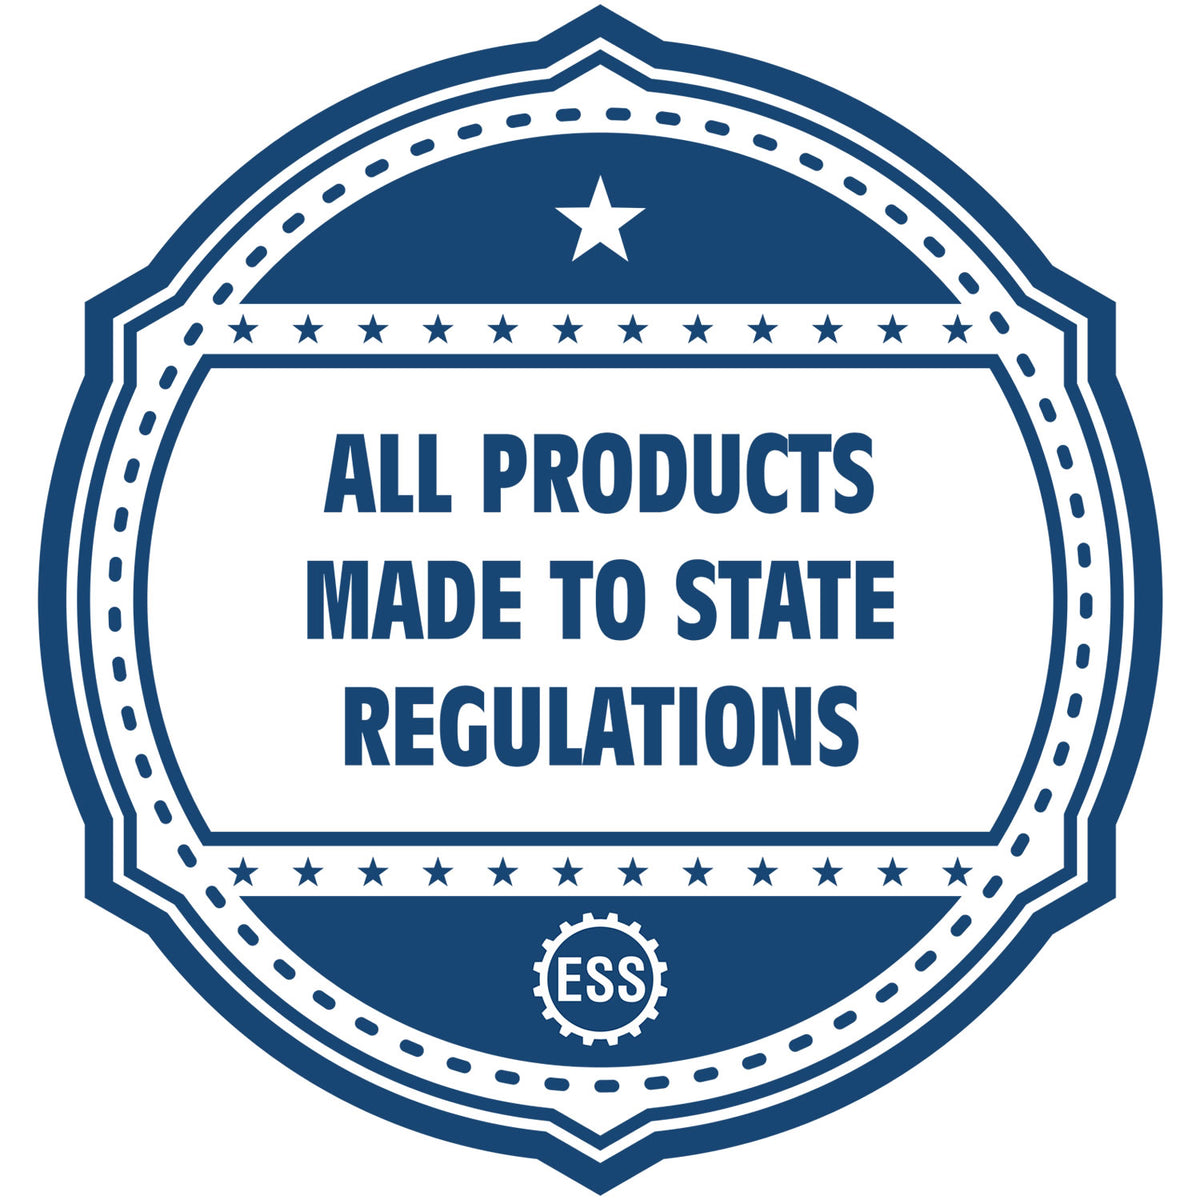 An icon or badge element for the Heavy Duty Cast Iron California Engineer Seal Embosser showing that this product is made in compliance with state regulations.